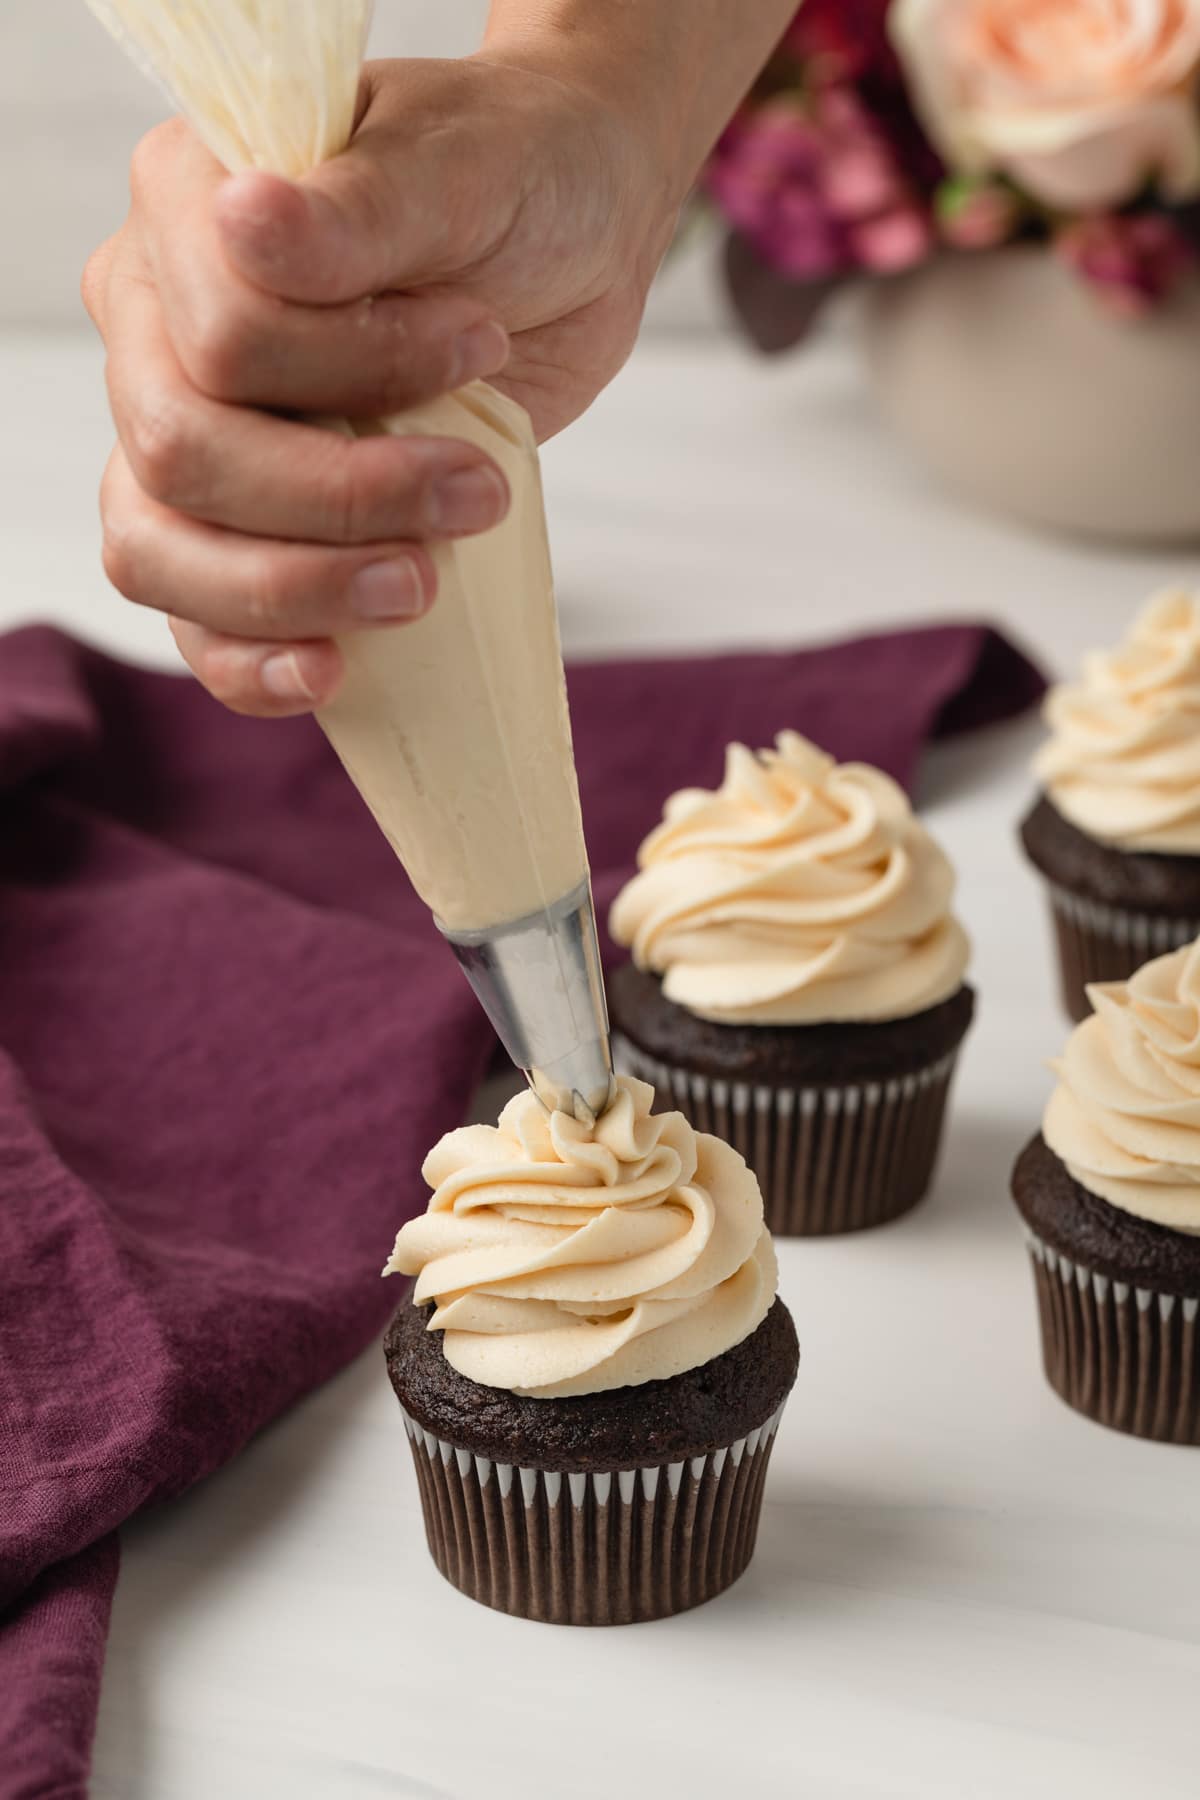 hand piping salted caramel frosting over a chocolate cupcake with purple cloth and more cupcakes in the background